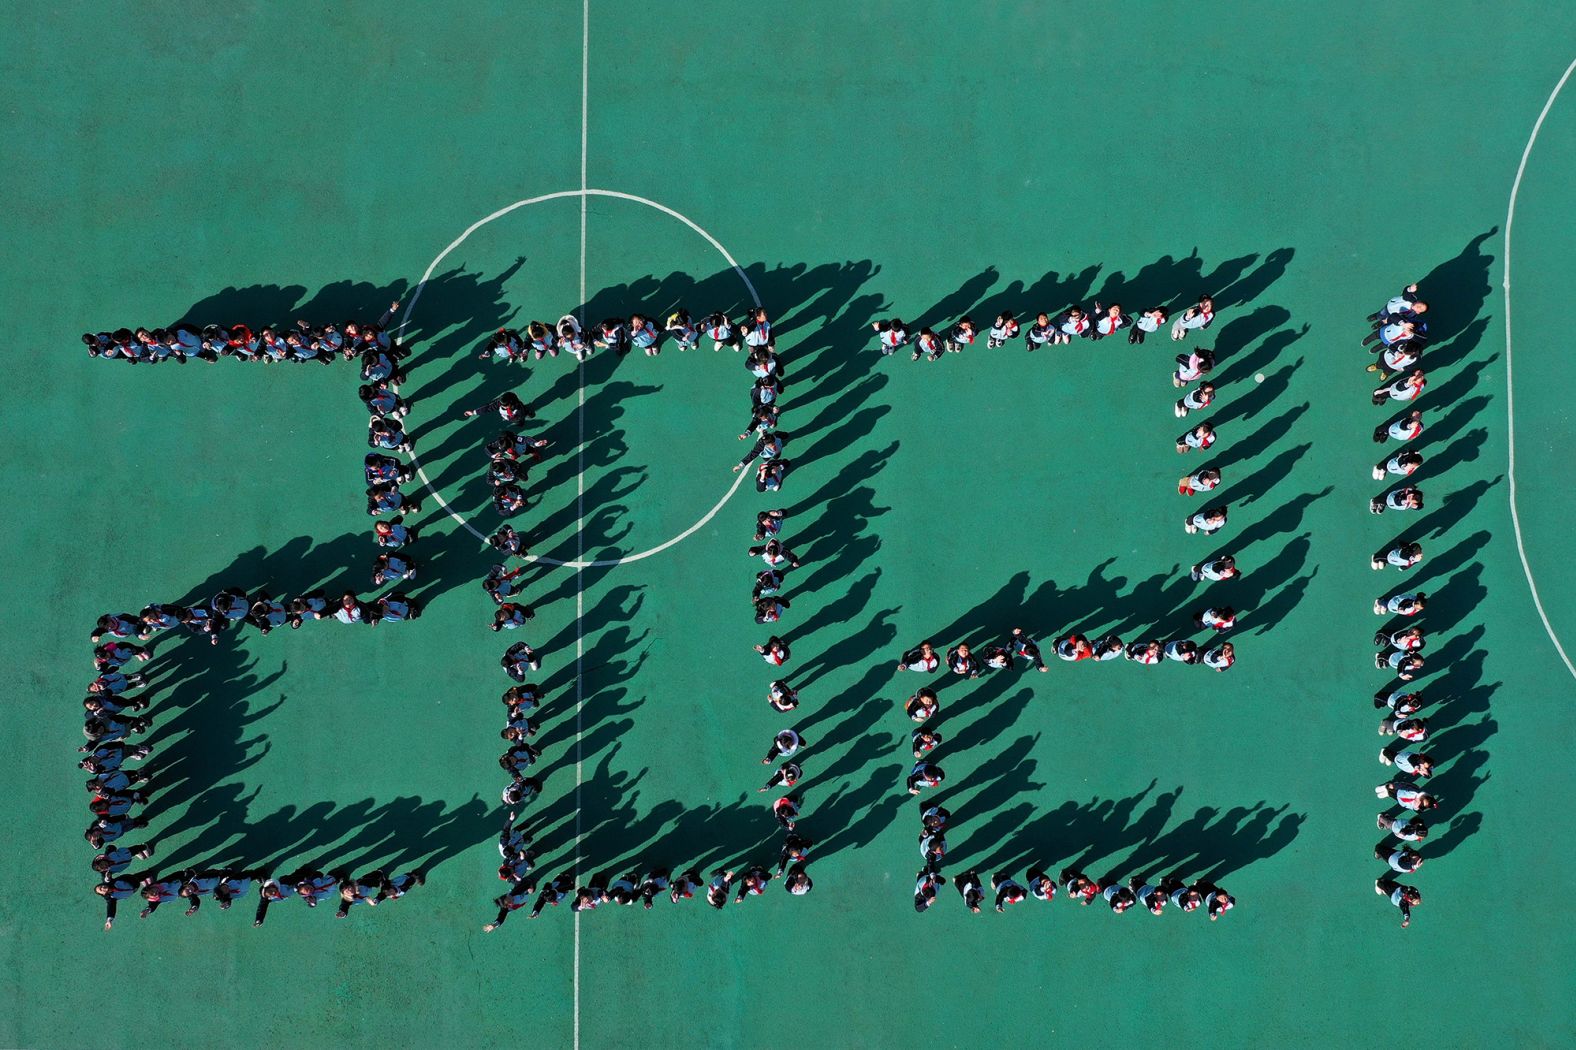 This aerial photo shows students in Xiangyang, China, standing in formation to mark 2021.